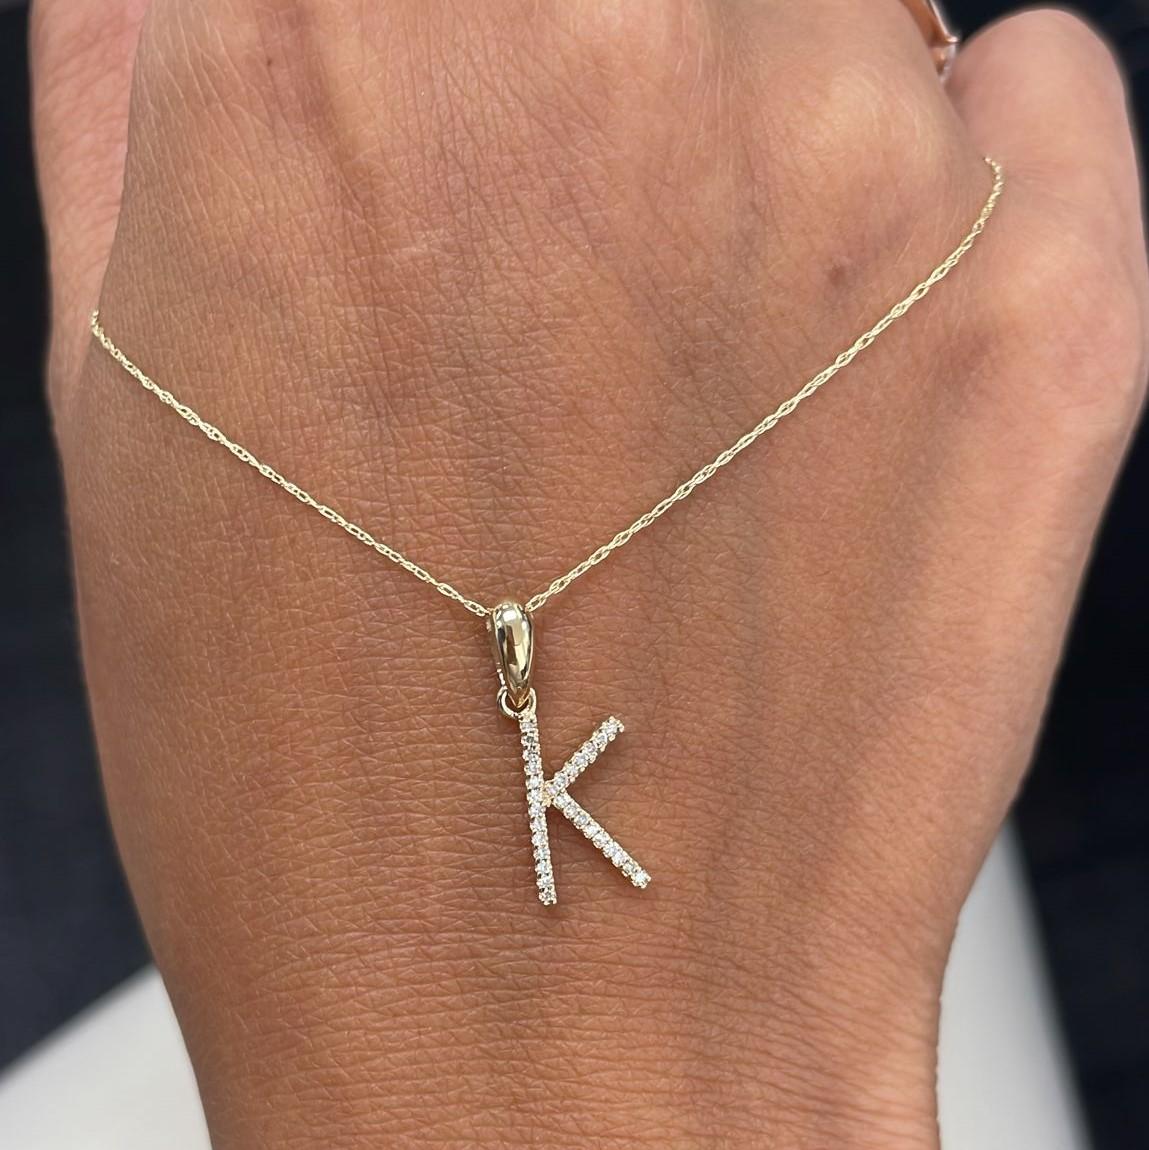 Alphabet Initial Pendant Necklace: Beautiful gold necklace perfectly sized at 16-18 inches in chain length an initial diameter 13mm featuring round diamonds between 0.09 ct - 0.12, allowing you to show off your name, new last name or alma mater.
